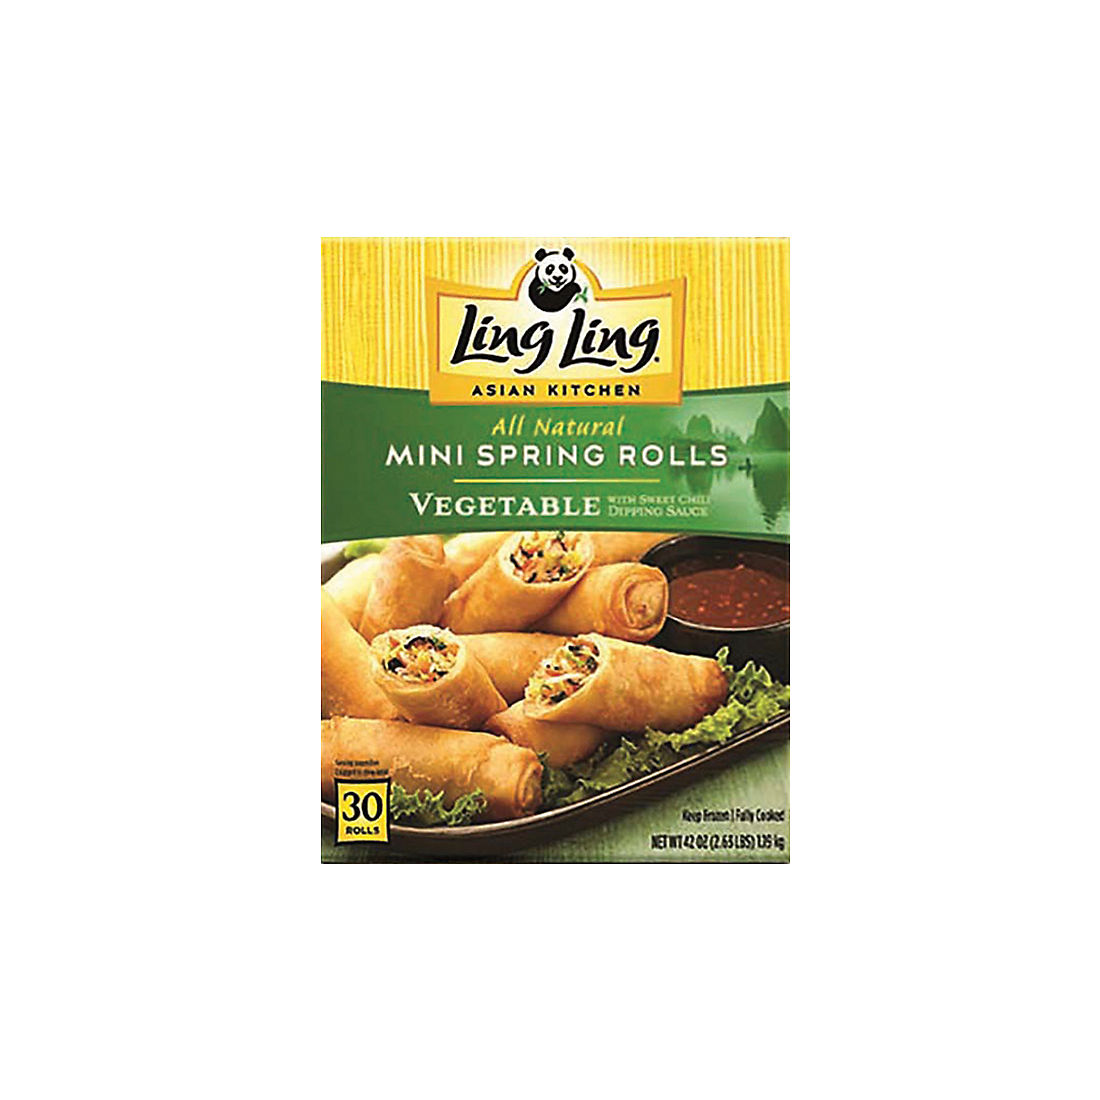 Ling Ling Mini Vegetable Spring Rolls, 20 ct.